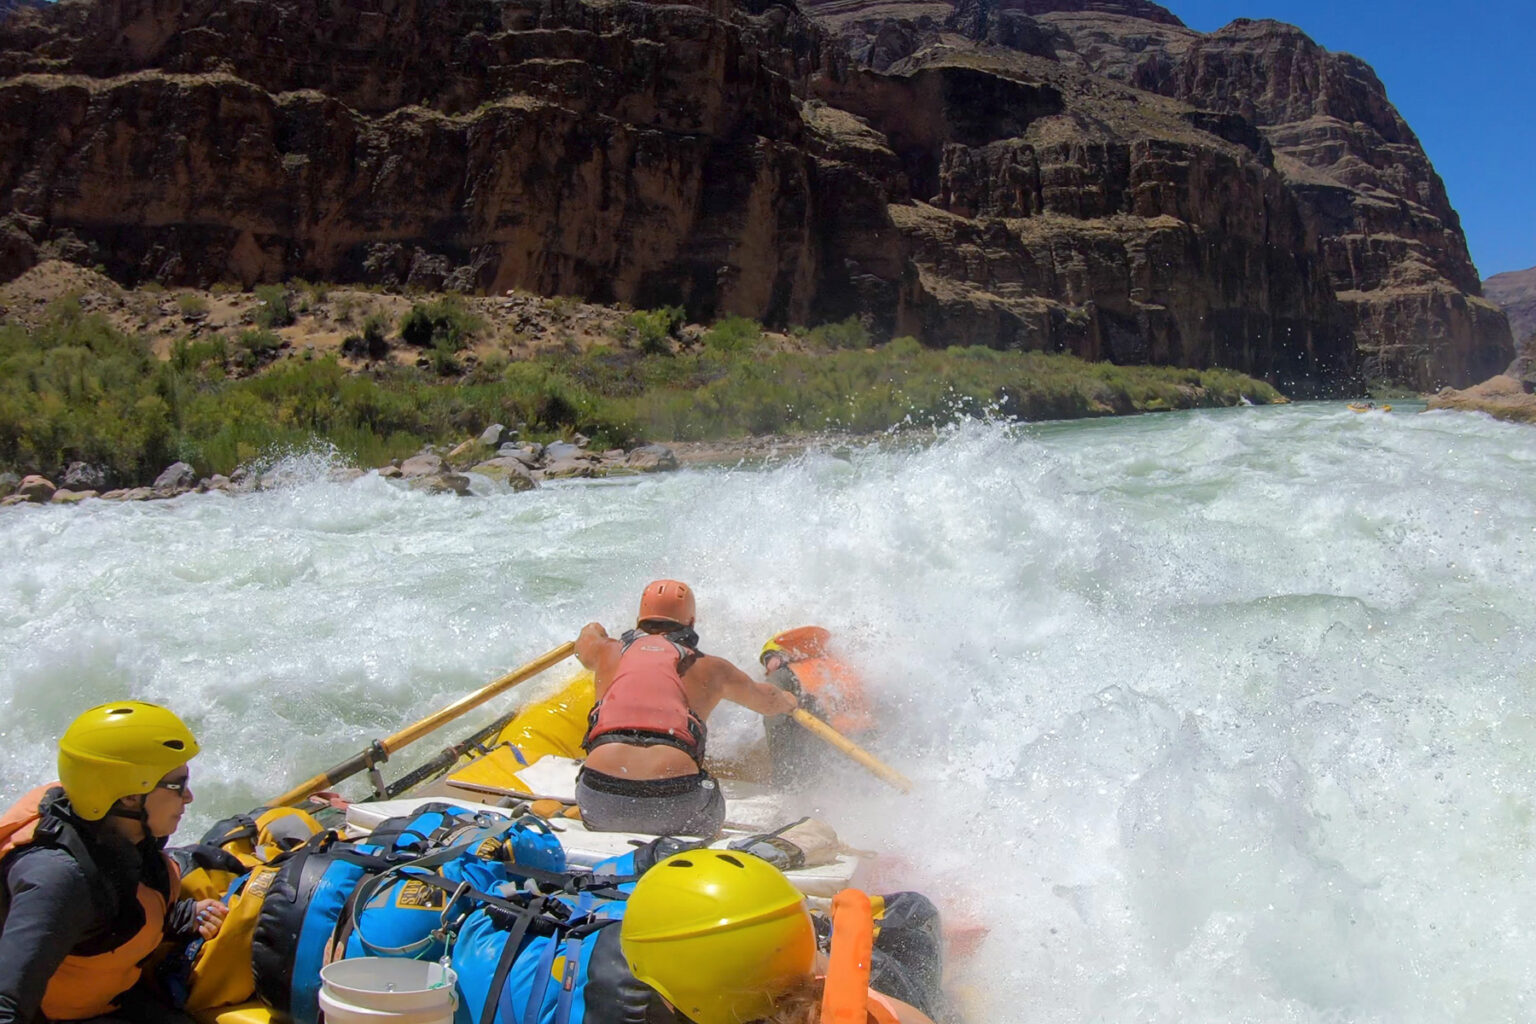 Guide on OARS raft tackles Lava Falls in Grand Canyon